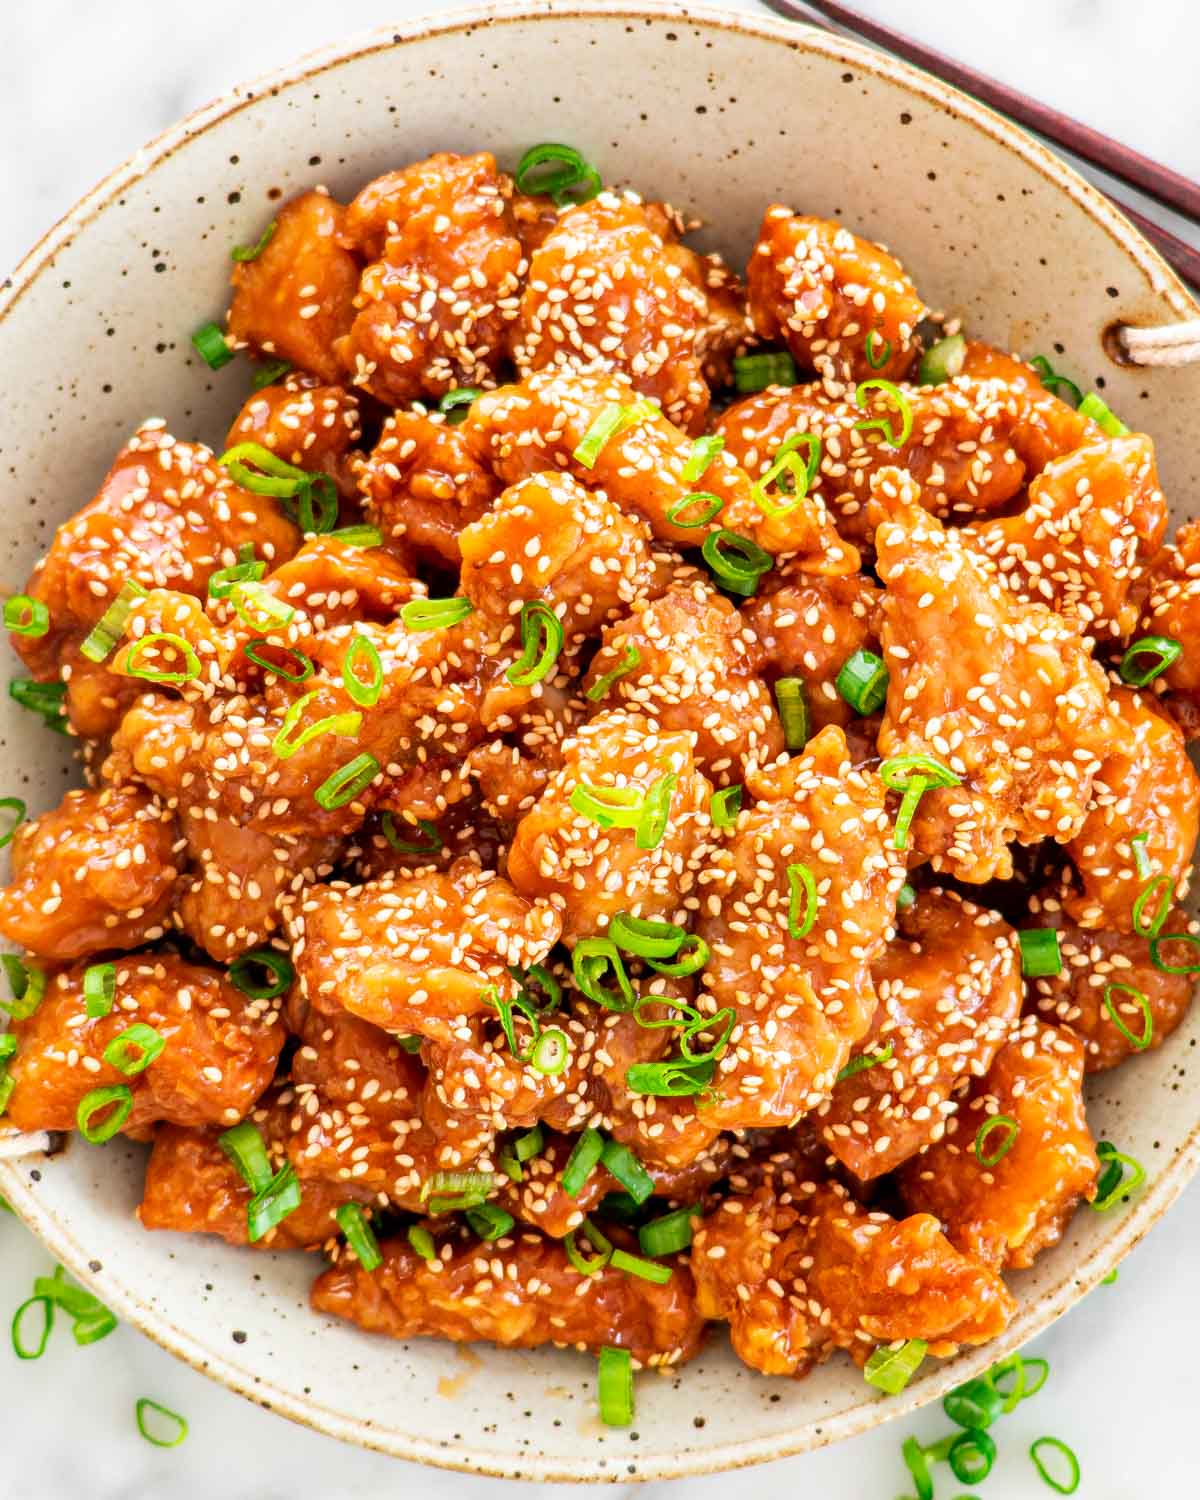 sesame chicken garnished with green onions in a fancy bowl